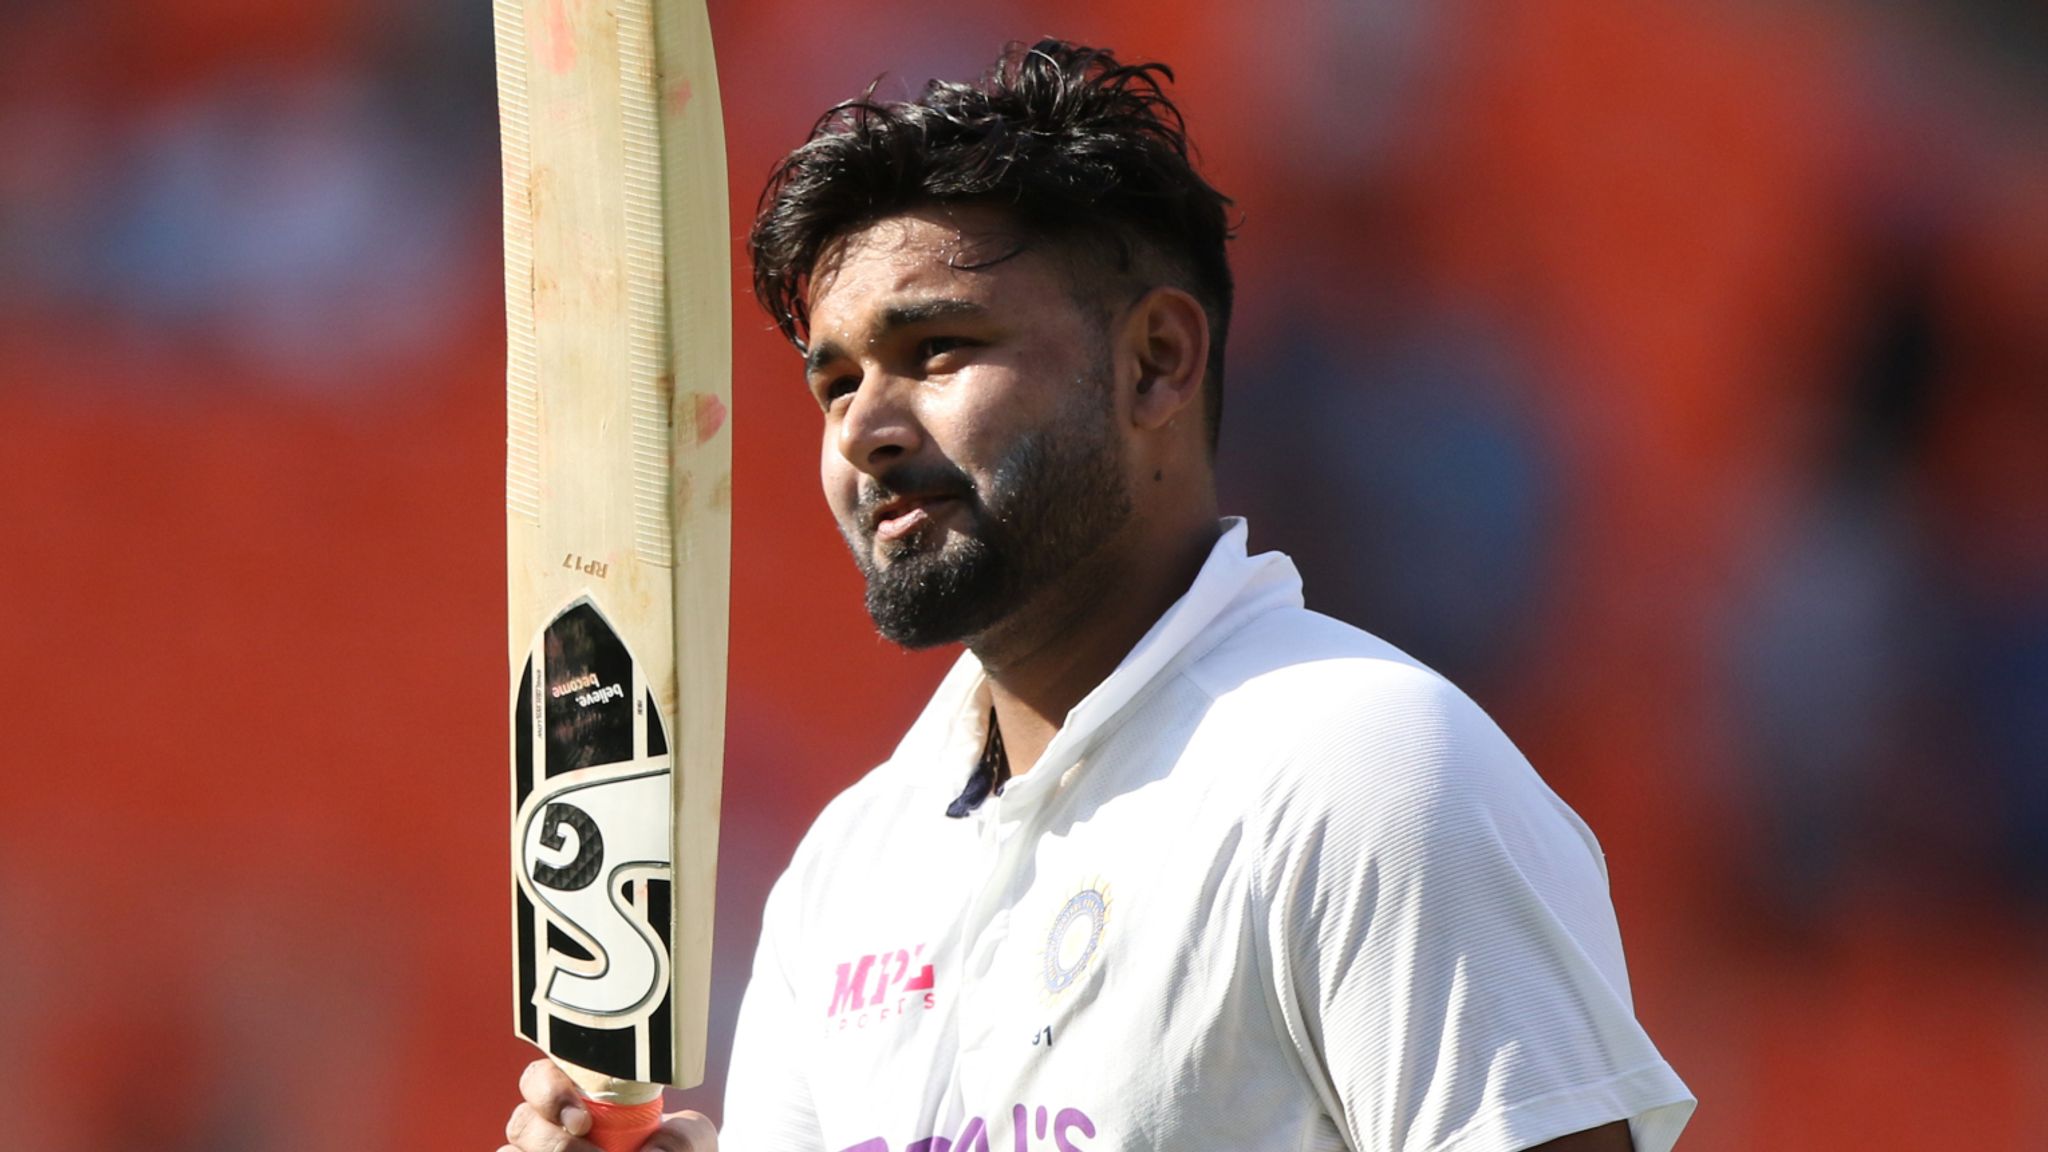 Rishabh Pant tests positive for Covid-19 ahead of England-India Test series  | Cricket News | Sky Sports